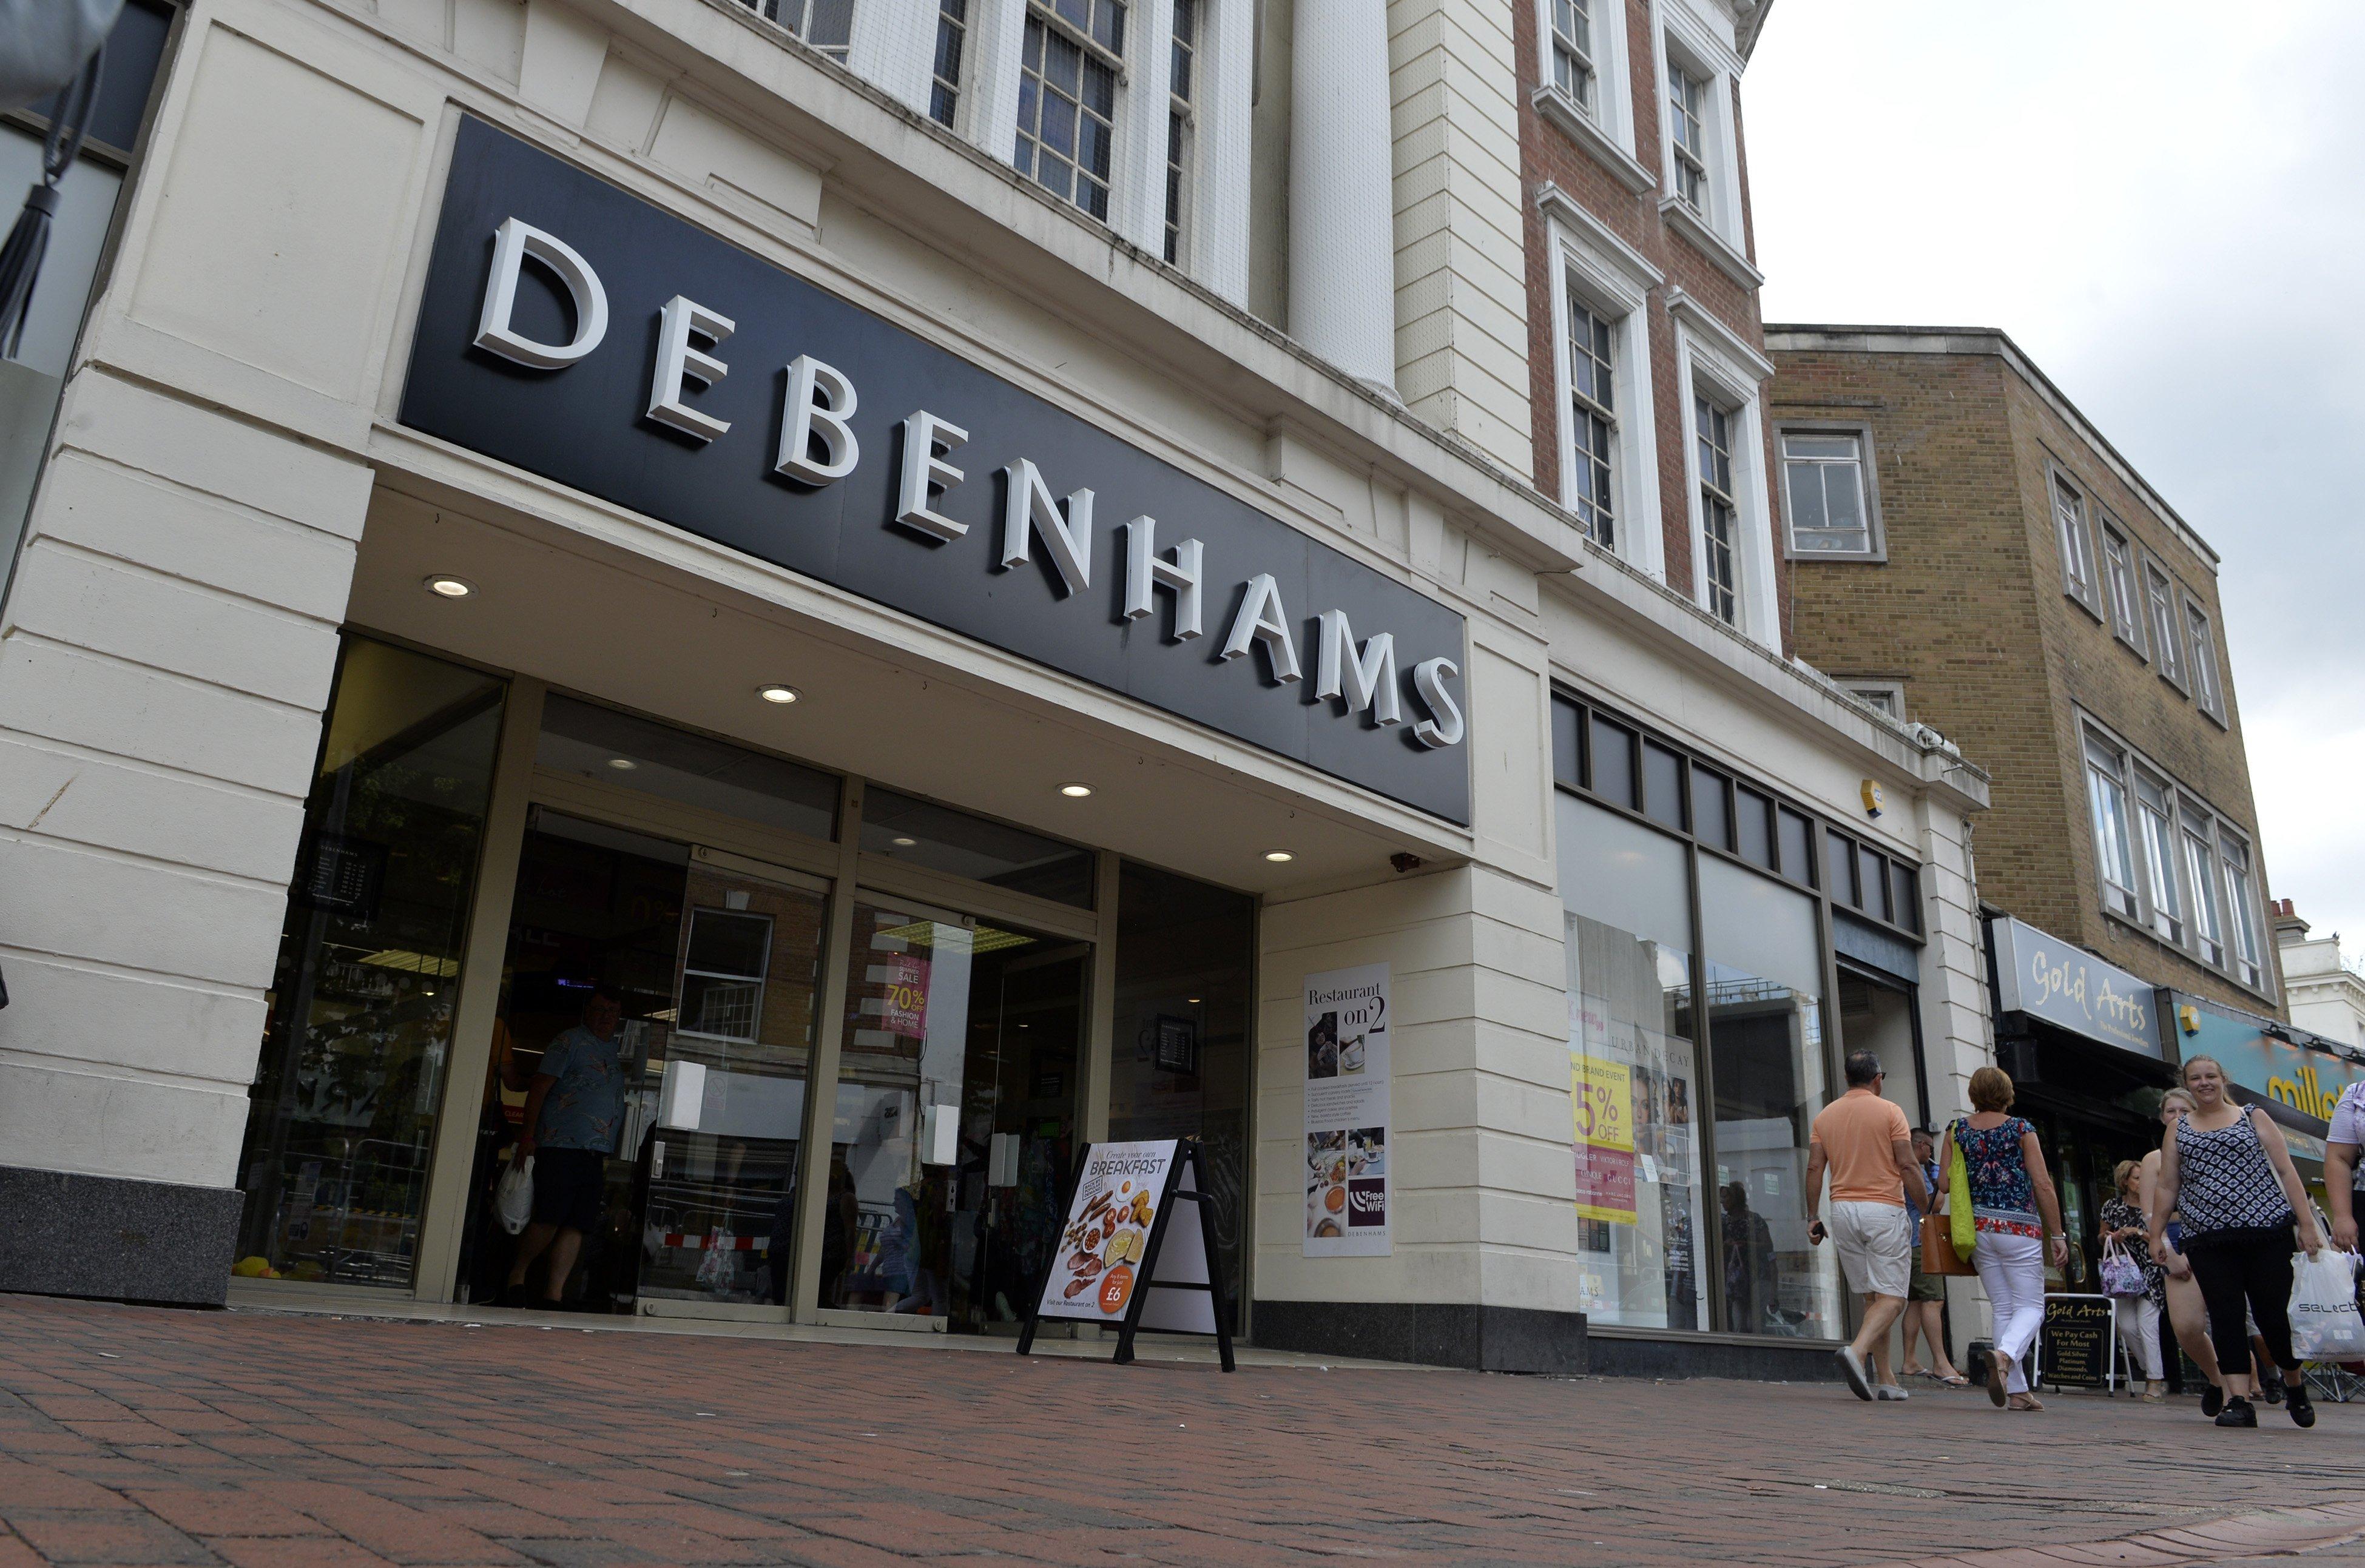 Debenhams in Terminus Road has announced it will close in January 2020 (Photo by Jon Rigby)